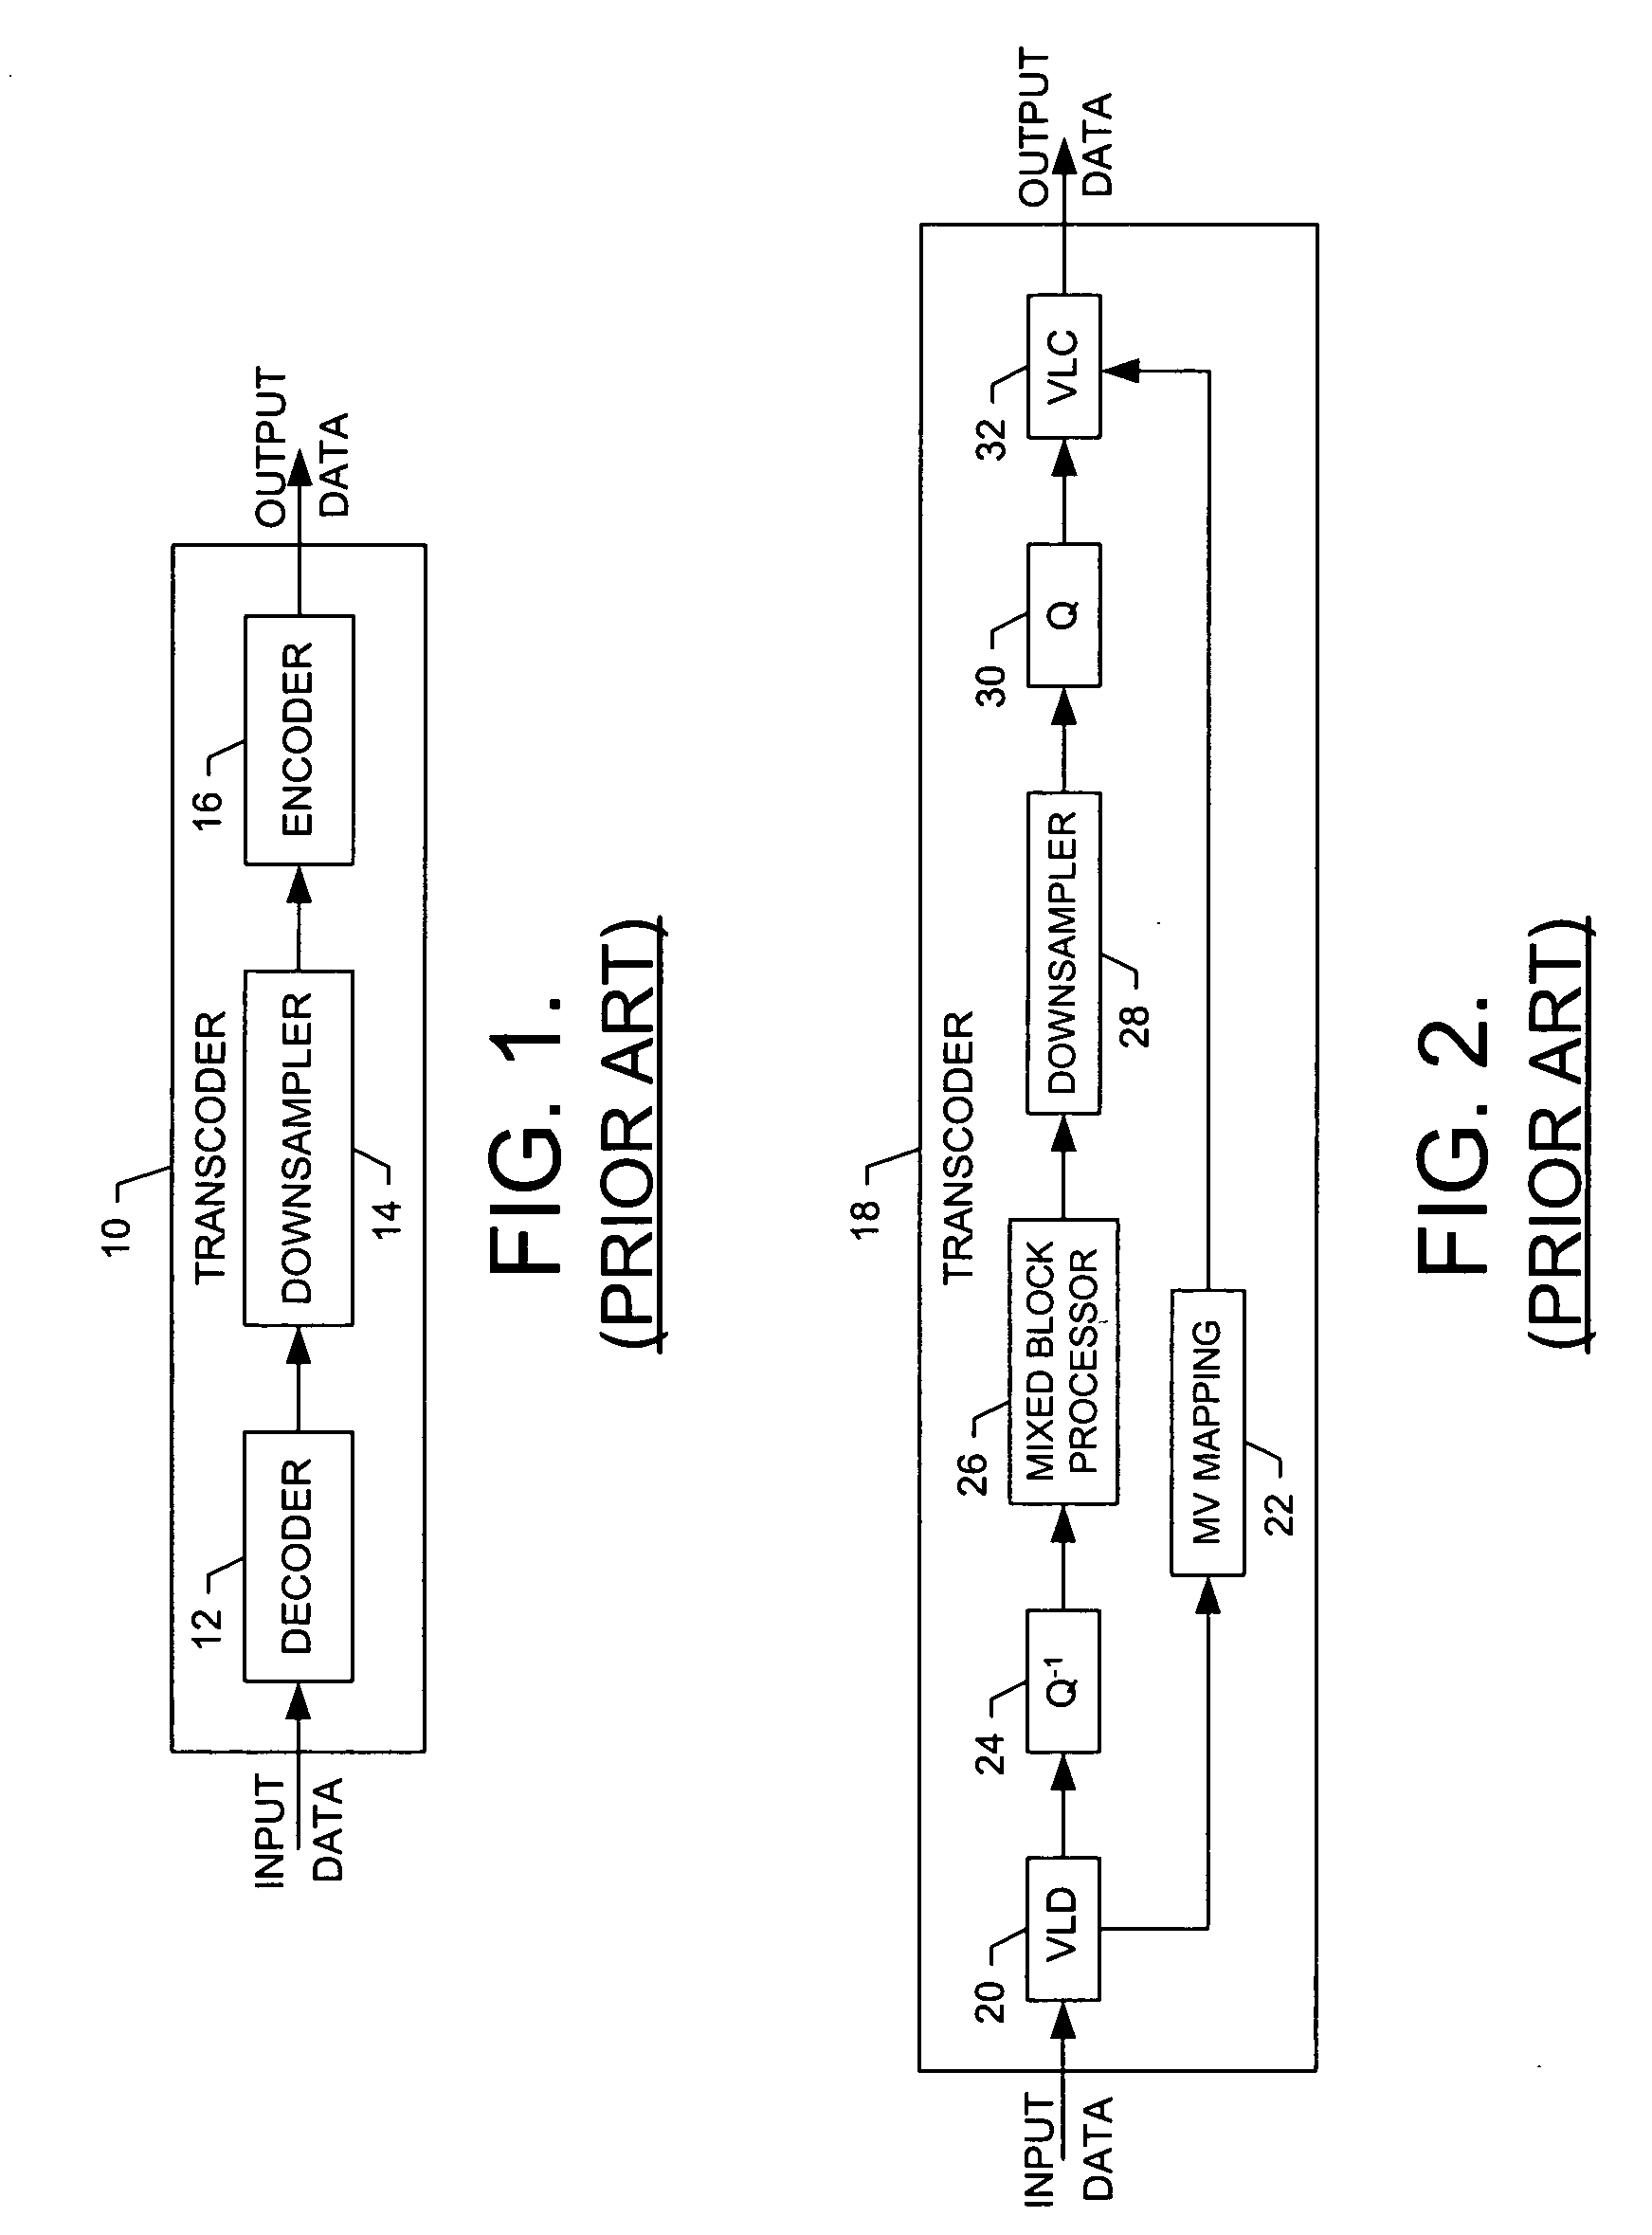 Transcoder and associated system, method and computer program product for low-complexity reduced resolution transcoding